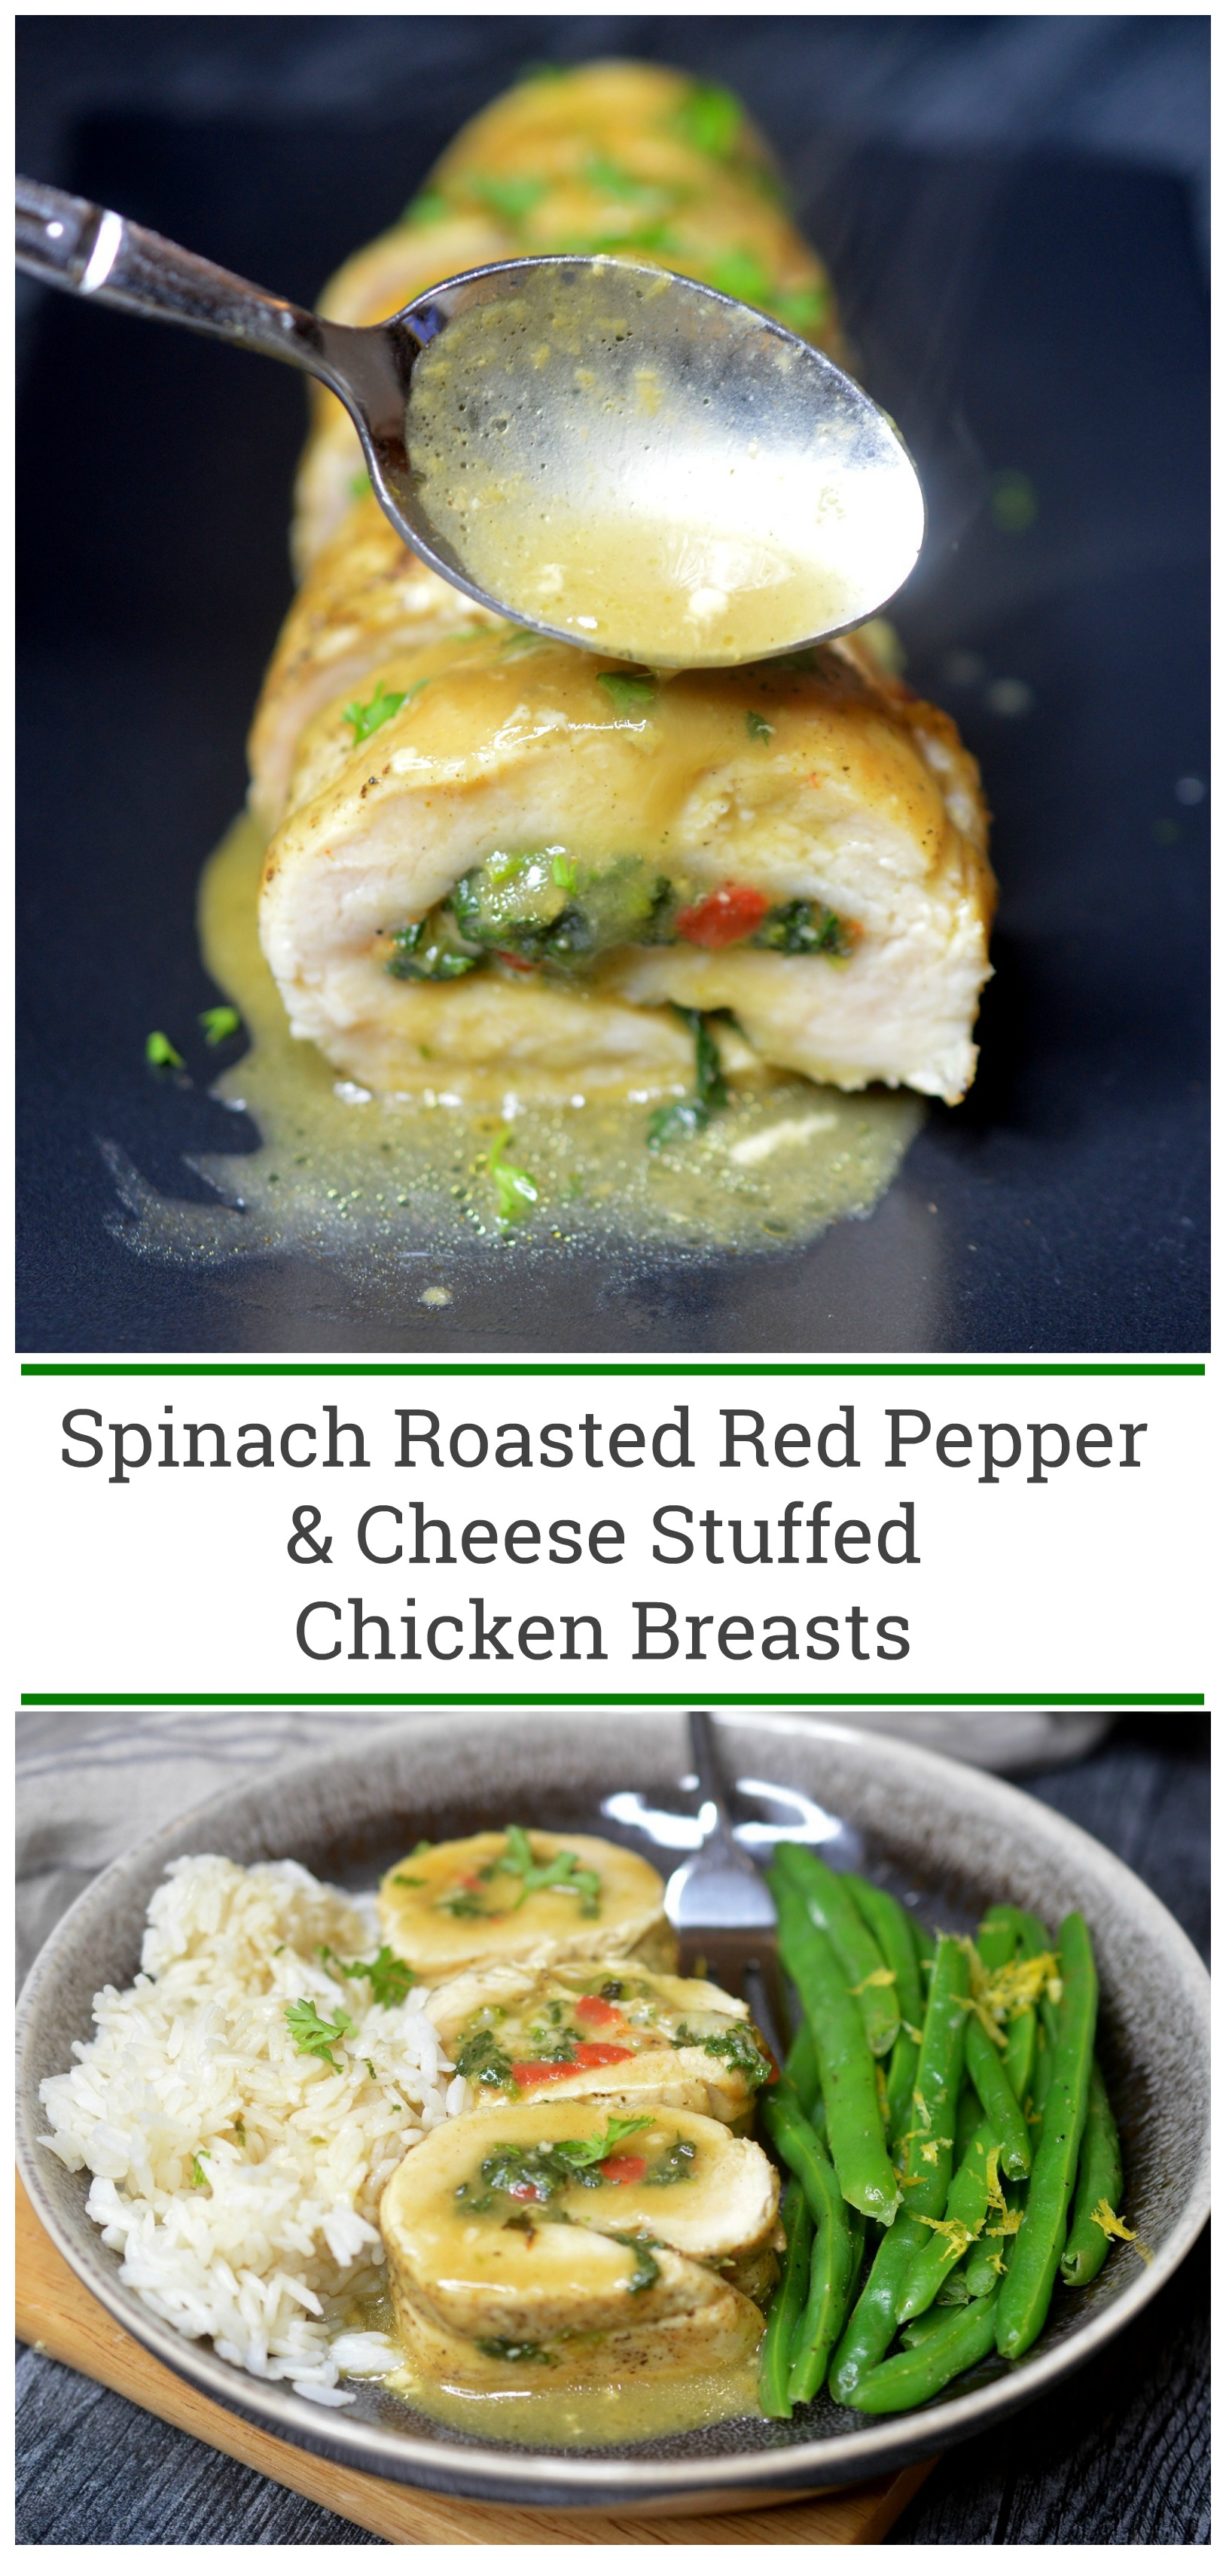 Delicious Spinach Roasted Red Pepper & Cheese Stuffed Chicken Breasts